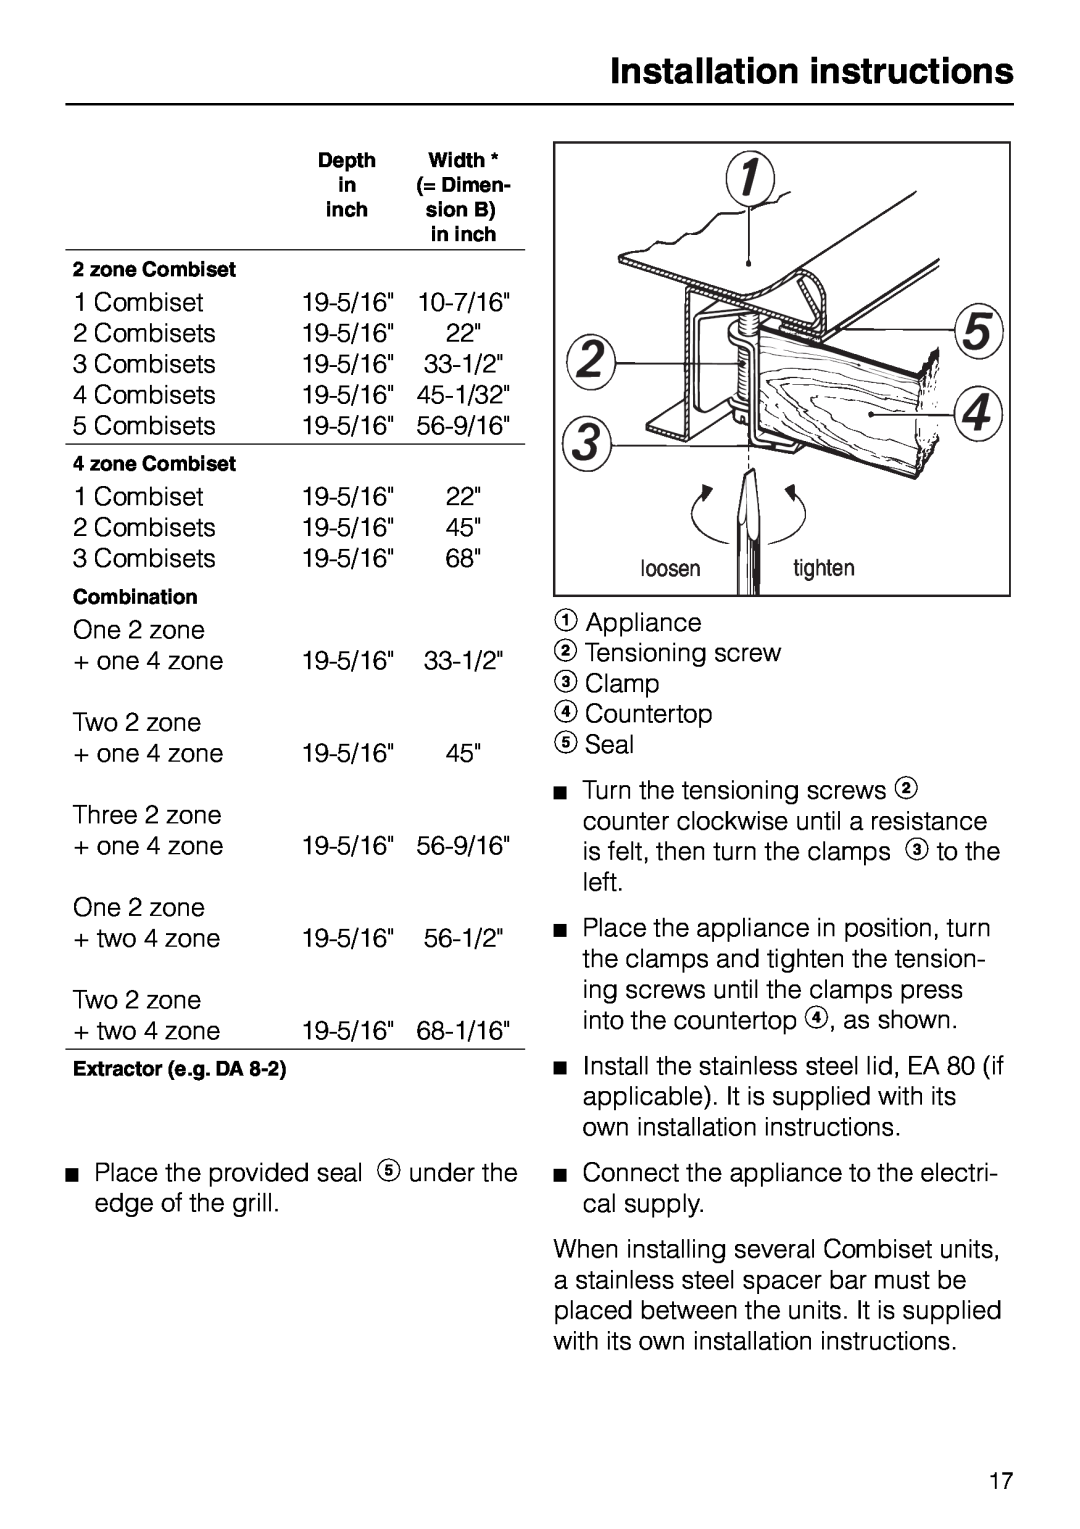 Miele KM88-2 operating instructions Installation instructions, Combiset 